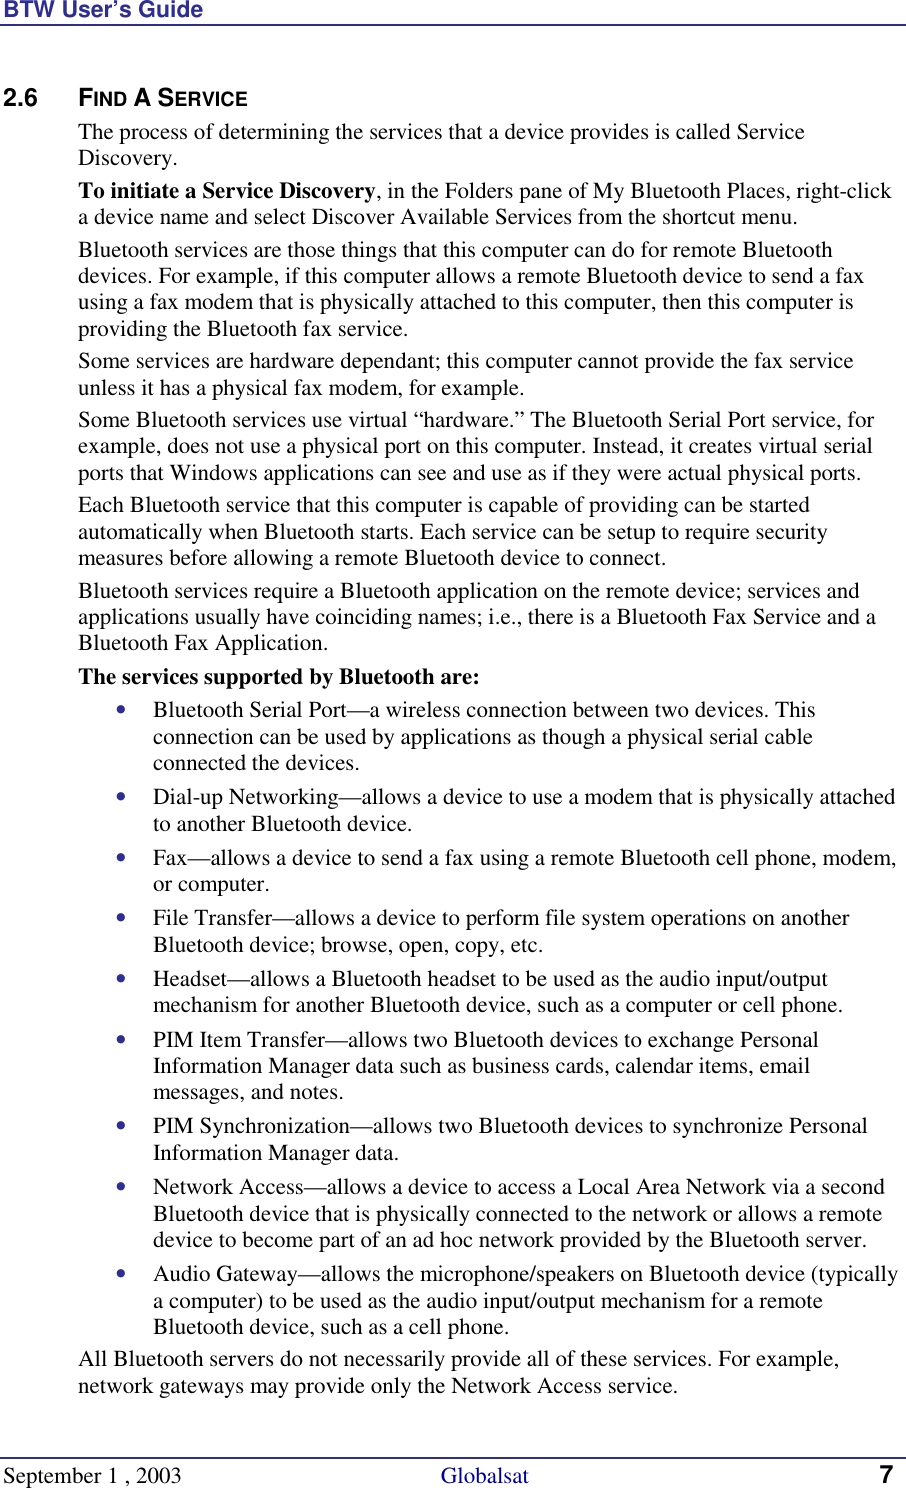 BTW User’s Guide September 1 , 2003                                             Globalsat 7 2.6 FIND A SERVICE The process of determining the services that a device provides is called Service Discovery. To initiate a Service Discovery, in the Folders pane of My Bluetooth Places, right-click a device name and select Discover Available Services from the shortcut menu. Bluetooth services are those things that this computer can do for remote Bluetooth devices. For example, if this computer allows a remote Bluetooth device to send a fax using a fax modem that is physically attached to this computer, then this computer is providing the Bluetooth fax service. Some services are hardware dependant; this computer cannot provide the fax service unless it has a physical fax modem, for example. Some Bluetooth services use virtual “hardware.” The Bluetooth Serial Port service, for example, does not use a physical port on this computer. Instead, it creates virtual serial ports that Windows applications can see and use as if they were actual physical ports. Each Bluetooth service that this computer is capable of providing can be started automatically when Bluetooth starts. Each service can be setup to require security measures before allowing a remote Bluetooth device to connect. Bluetooth services require a Bluetooth application on the remote device; services and applications usually have coinciding names; i.e., there is a Bluetooth Fax Service and a Bluetooth Fax Application. The services supported by Bluetooth are: •  Bluetooth Serial Port—a wireless connection between two devices. This connection can be used by applications as though a physical serial cable connected the devices. •  Dial-up Networking—allows a device to use a modem that is physically attached to another Bluetooth device. •  Fax—allows a device to send a fax using a remote Bluetooth cell phone, modem, or computer. •  File Transfer—allows a device to perform file system operations on another Bluetooth device; browse, open, copy, etc. •  Headset—allows a Bluetooth headset to be used as the audio input/output mechanism for another Bluetooth device, such as a computer or cell phone. •  PIM Item Transfer—allows two Bluetooth devices to exchange Personal Information Manager data such as business cards, calendar items, email messages, and notes. •  PIM Synchronization—allows two Bluetooth devices to synchronize Personal Information Manager data.  •  Network Access—allows a device to access a Local Area Network via a second Bluetooth device that is physically connected to the network or allows a remote device to become part of an ad hoc network provided by the Bluetooth server. •  Audio Gateway—allows the microphone/speakers on Bluetooth device (typically a computer) to be used as the audio input/output mechanism for a remote Bluetooth device, such as a cell phone. All Bluetooth servers do not necessarily provide all of these services. For example, network gateways may provide only the Network Access service. 